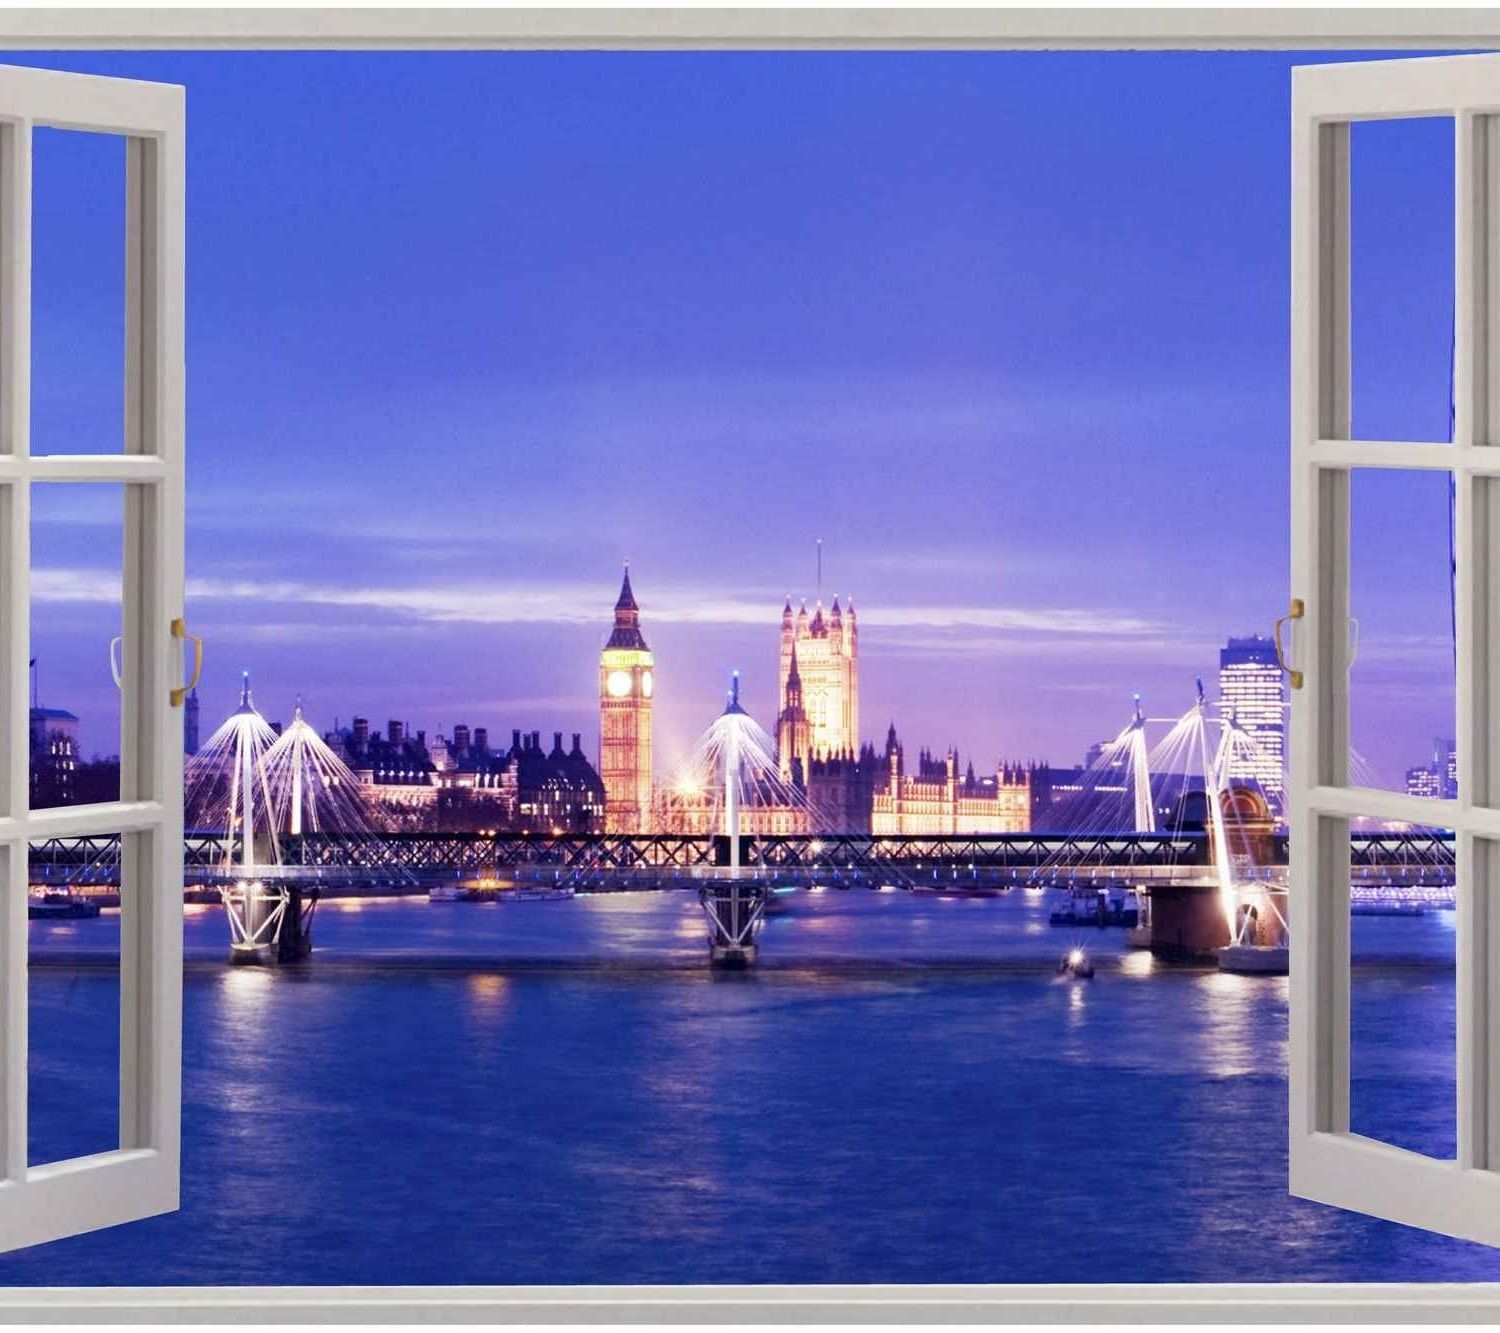 London Scene Wall Art For Widely Used Window London View Wall Stickers Film Mural Art Decal Wallpaper (View 5 of 15)